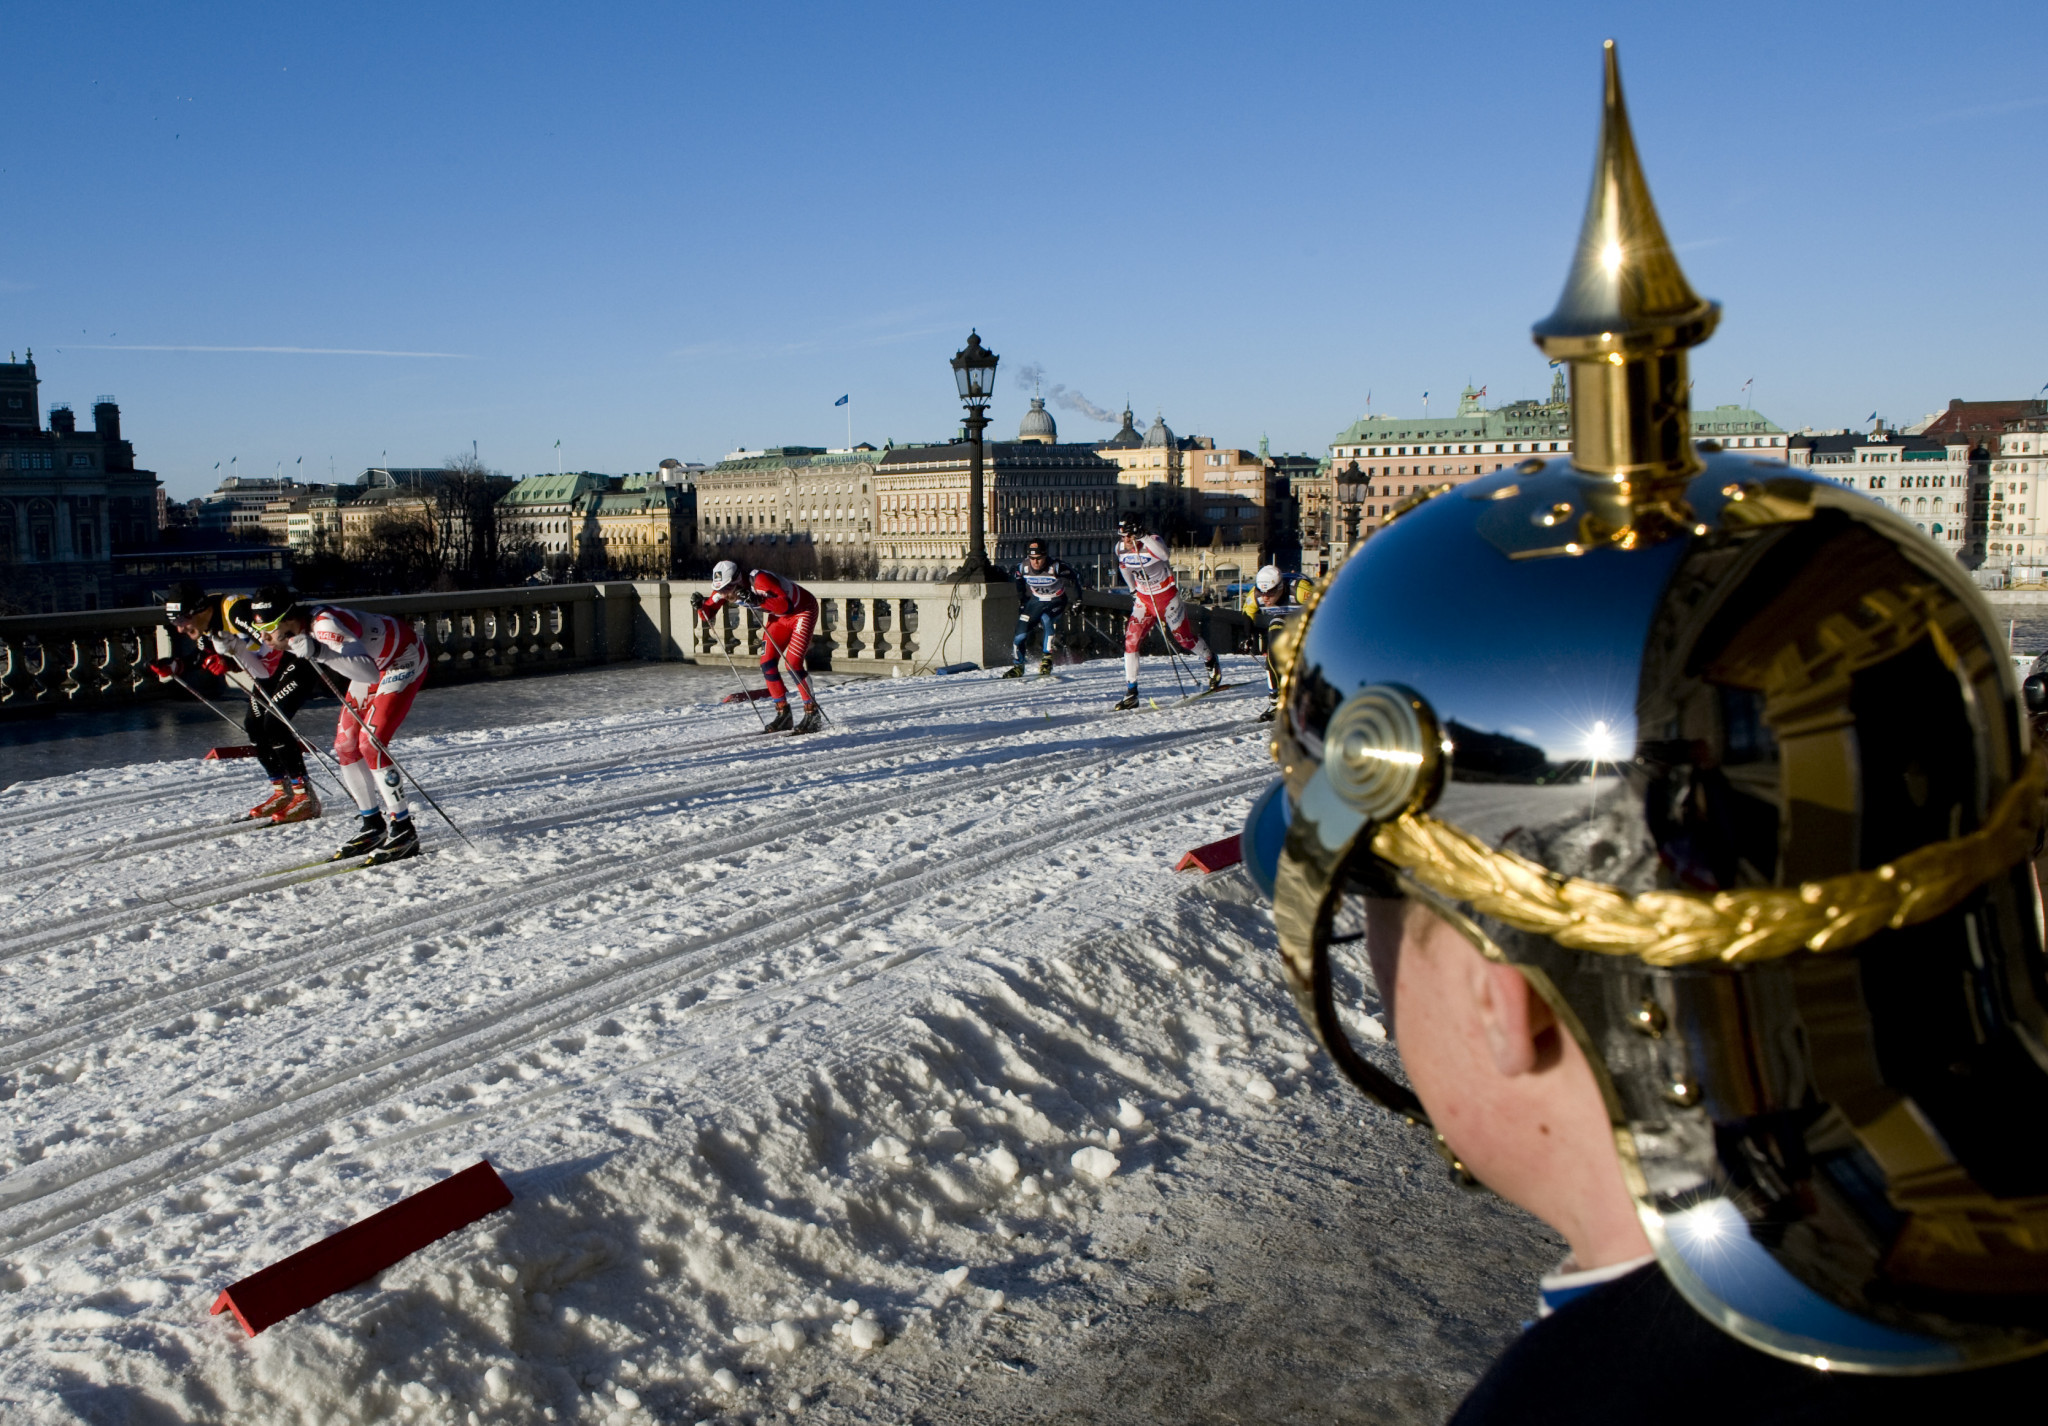 Stockholm is one of two candidates remaining in the 2026 Winter Olympic race ©Getty Images